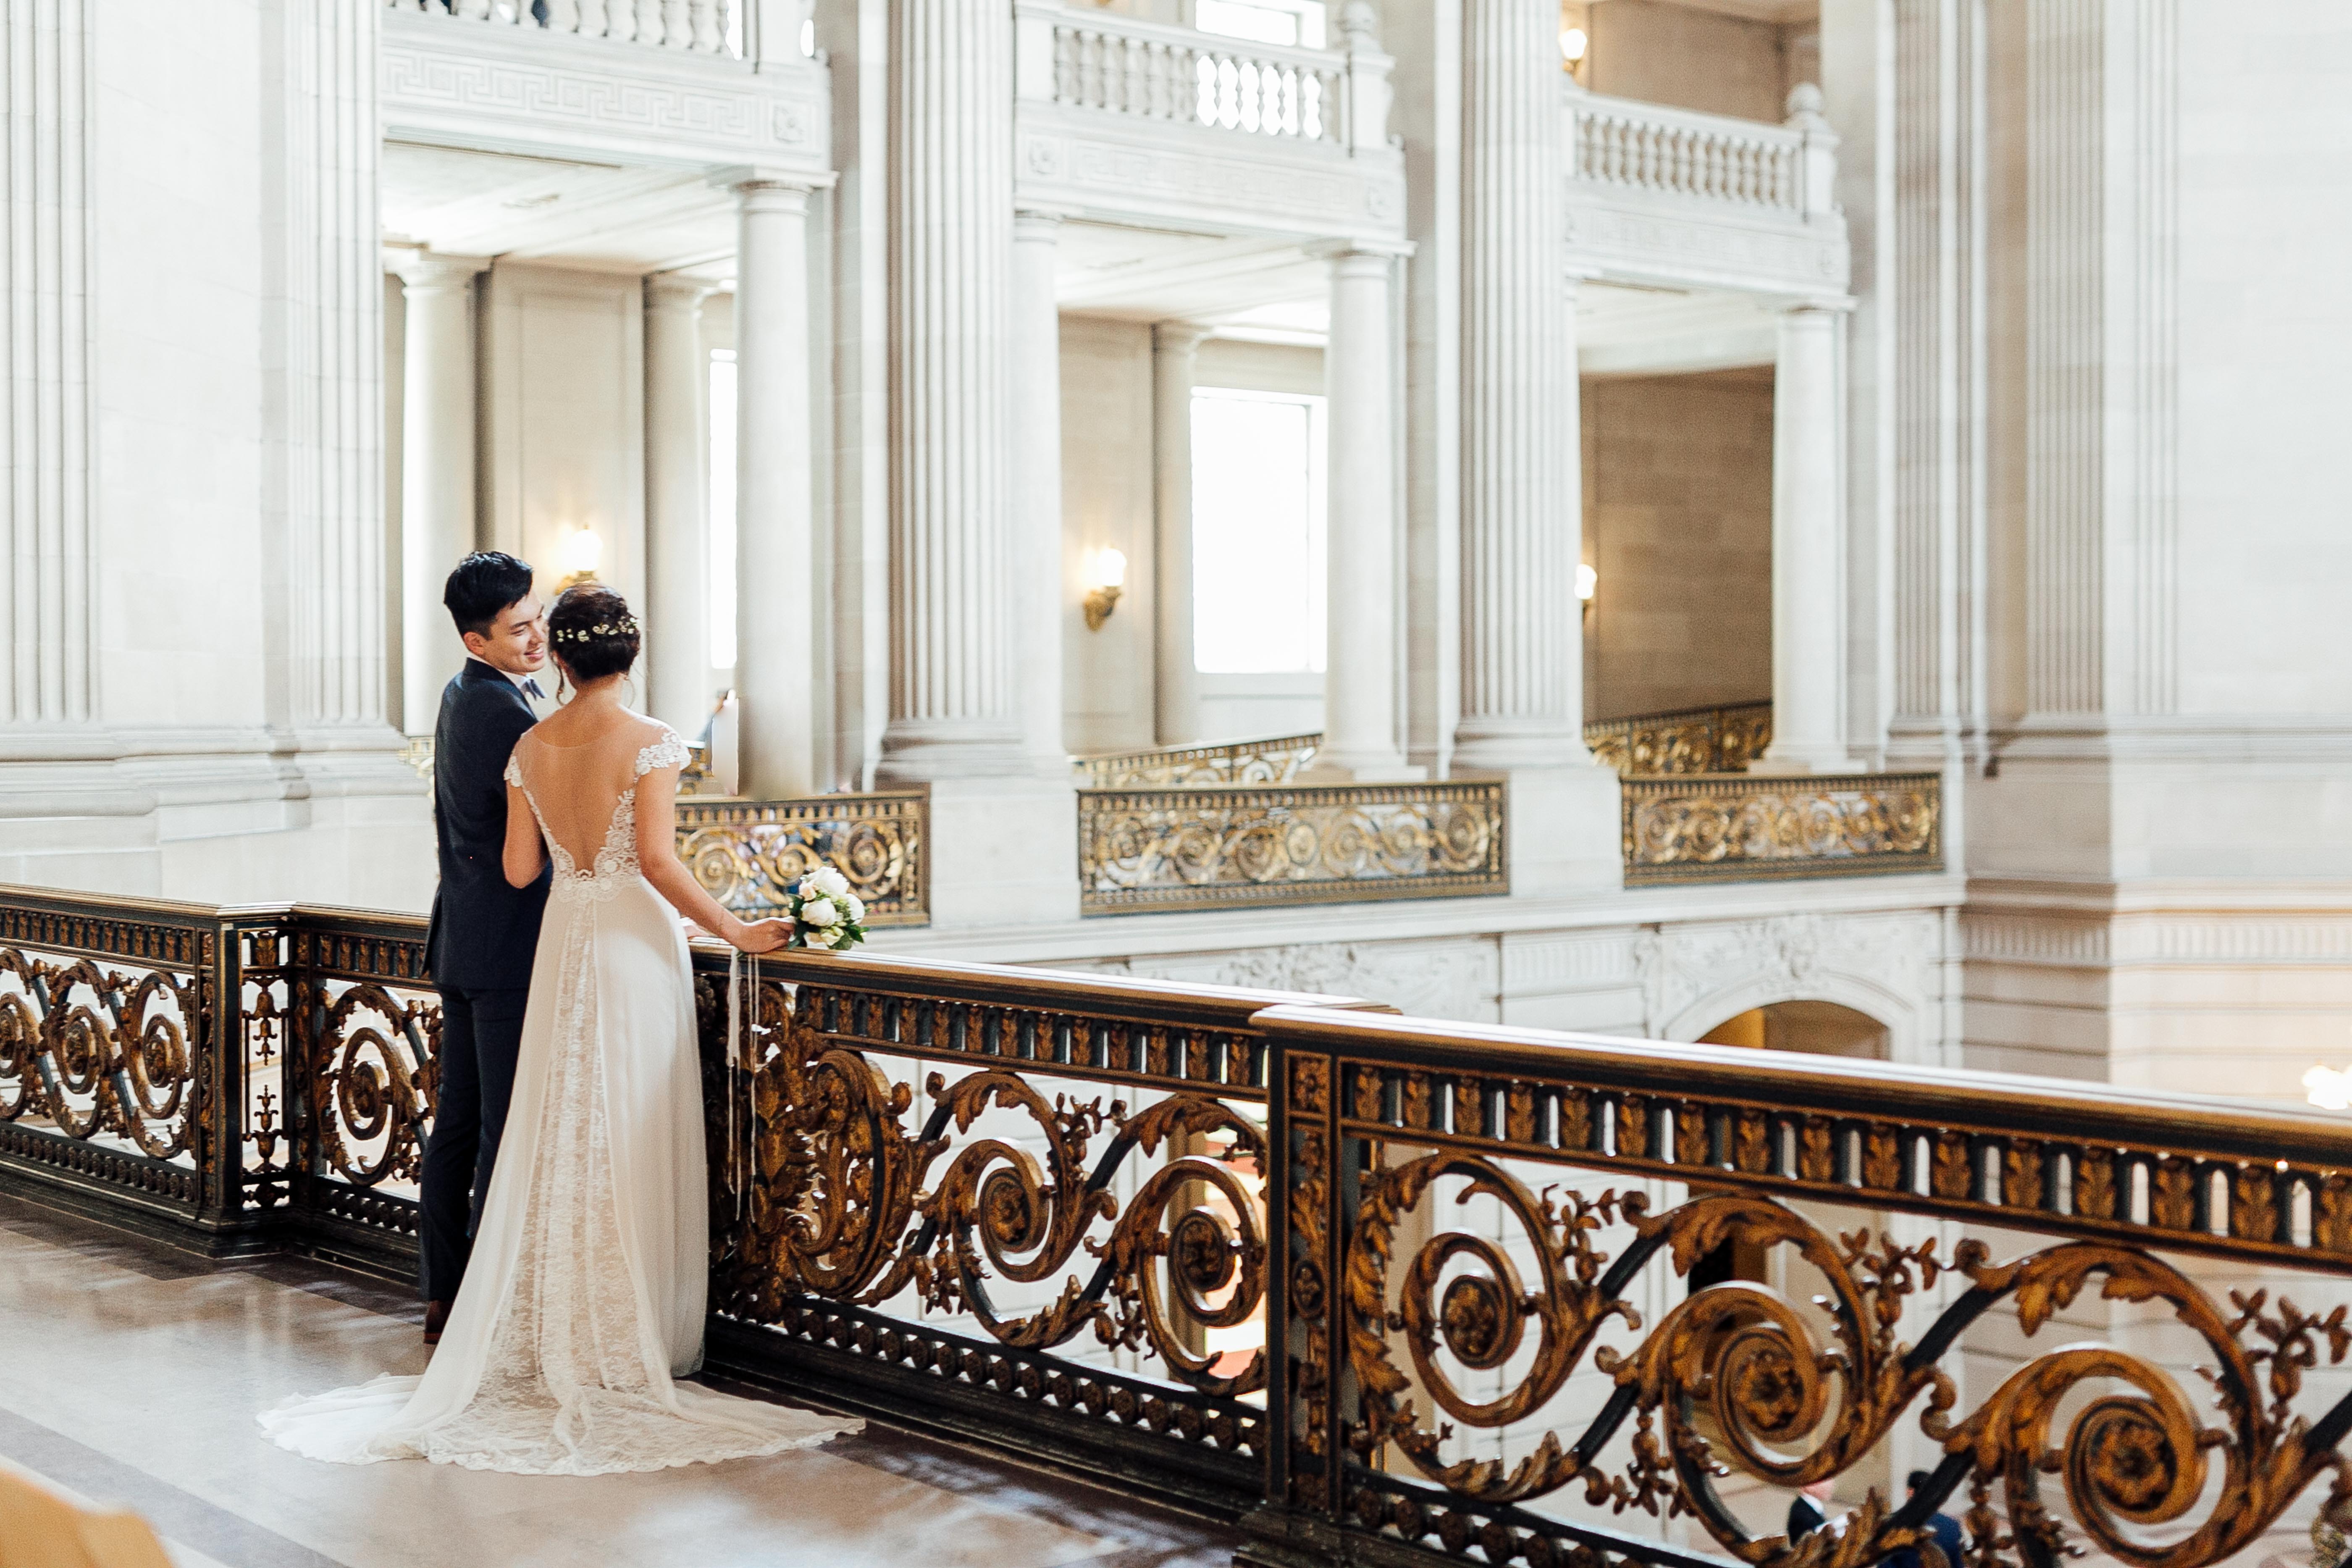 Bride and groom stand on elegant balcony of City Hall